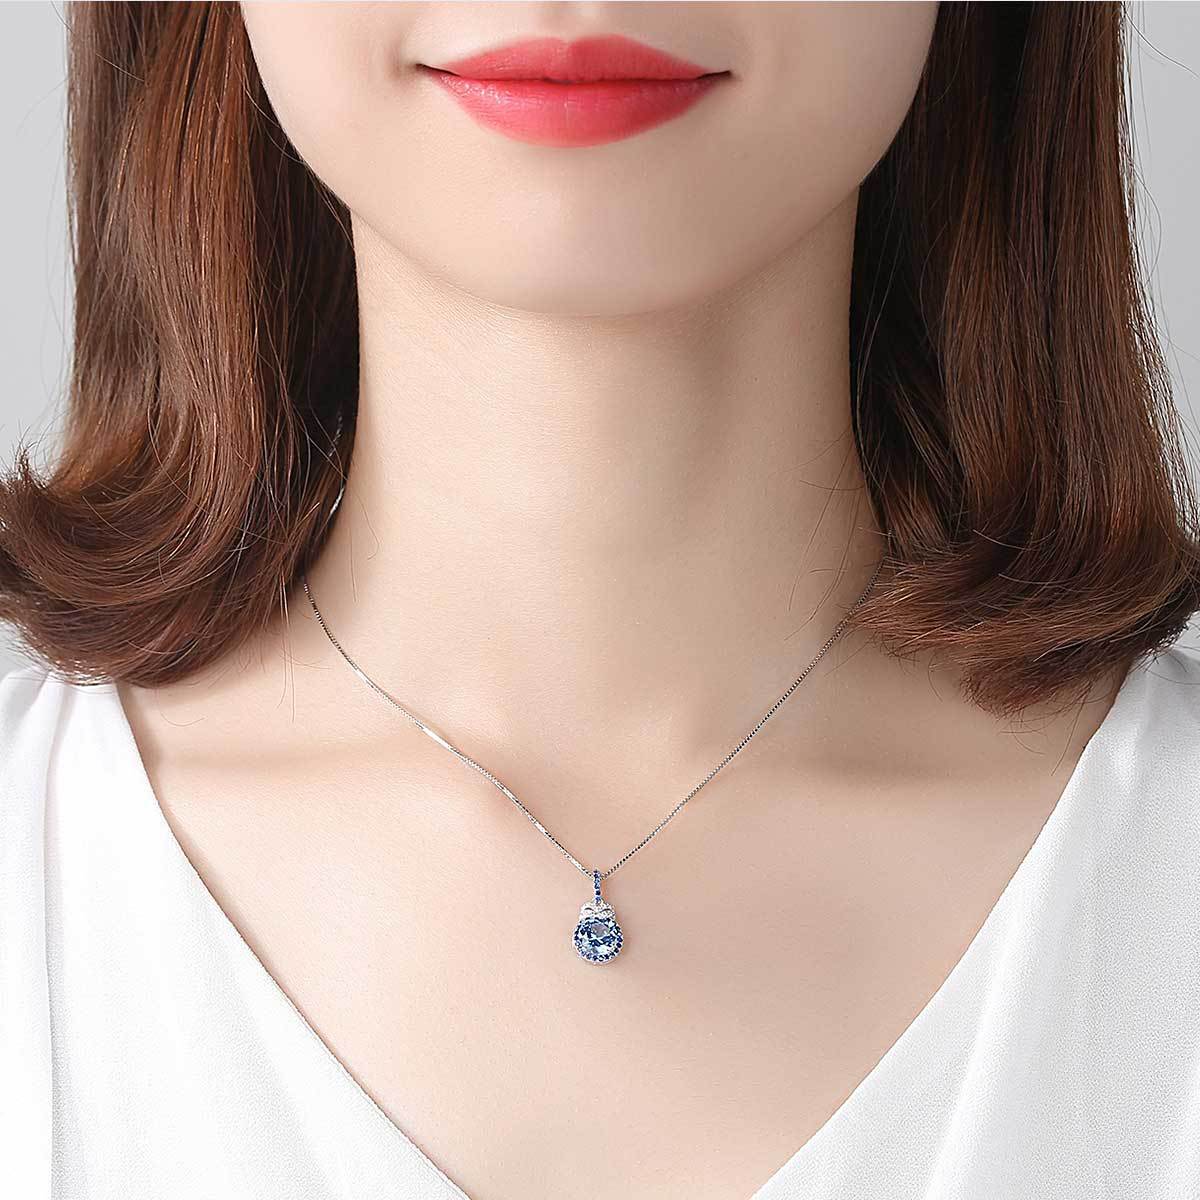 Gemstonely-Luxury Topaz Pendant Necklace for Women - Swiss Blue and 925 Silver Chain